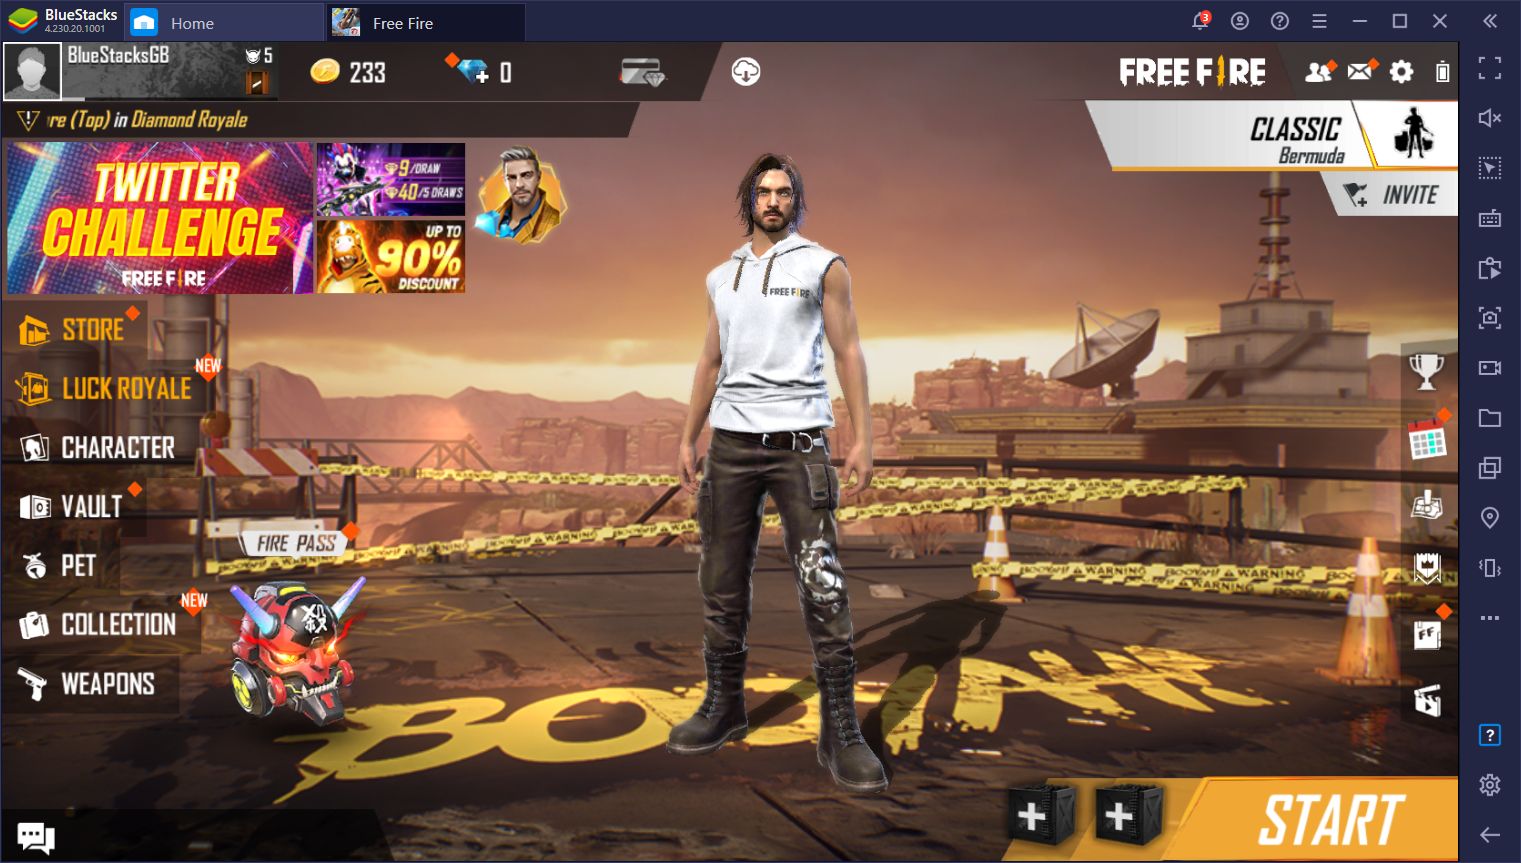 Free Fire Anubis Legend Ii Elite Pass Brings Egyptian Themed Rewards To The Popular Mobile Battle Royale Bluestacks